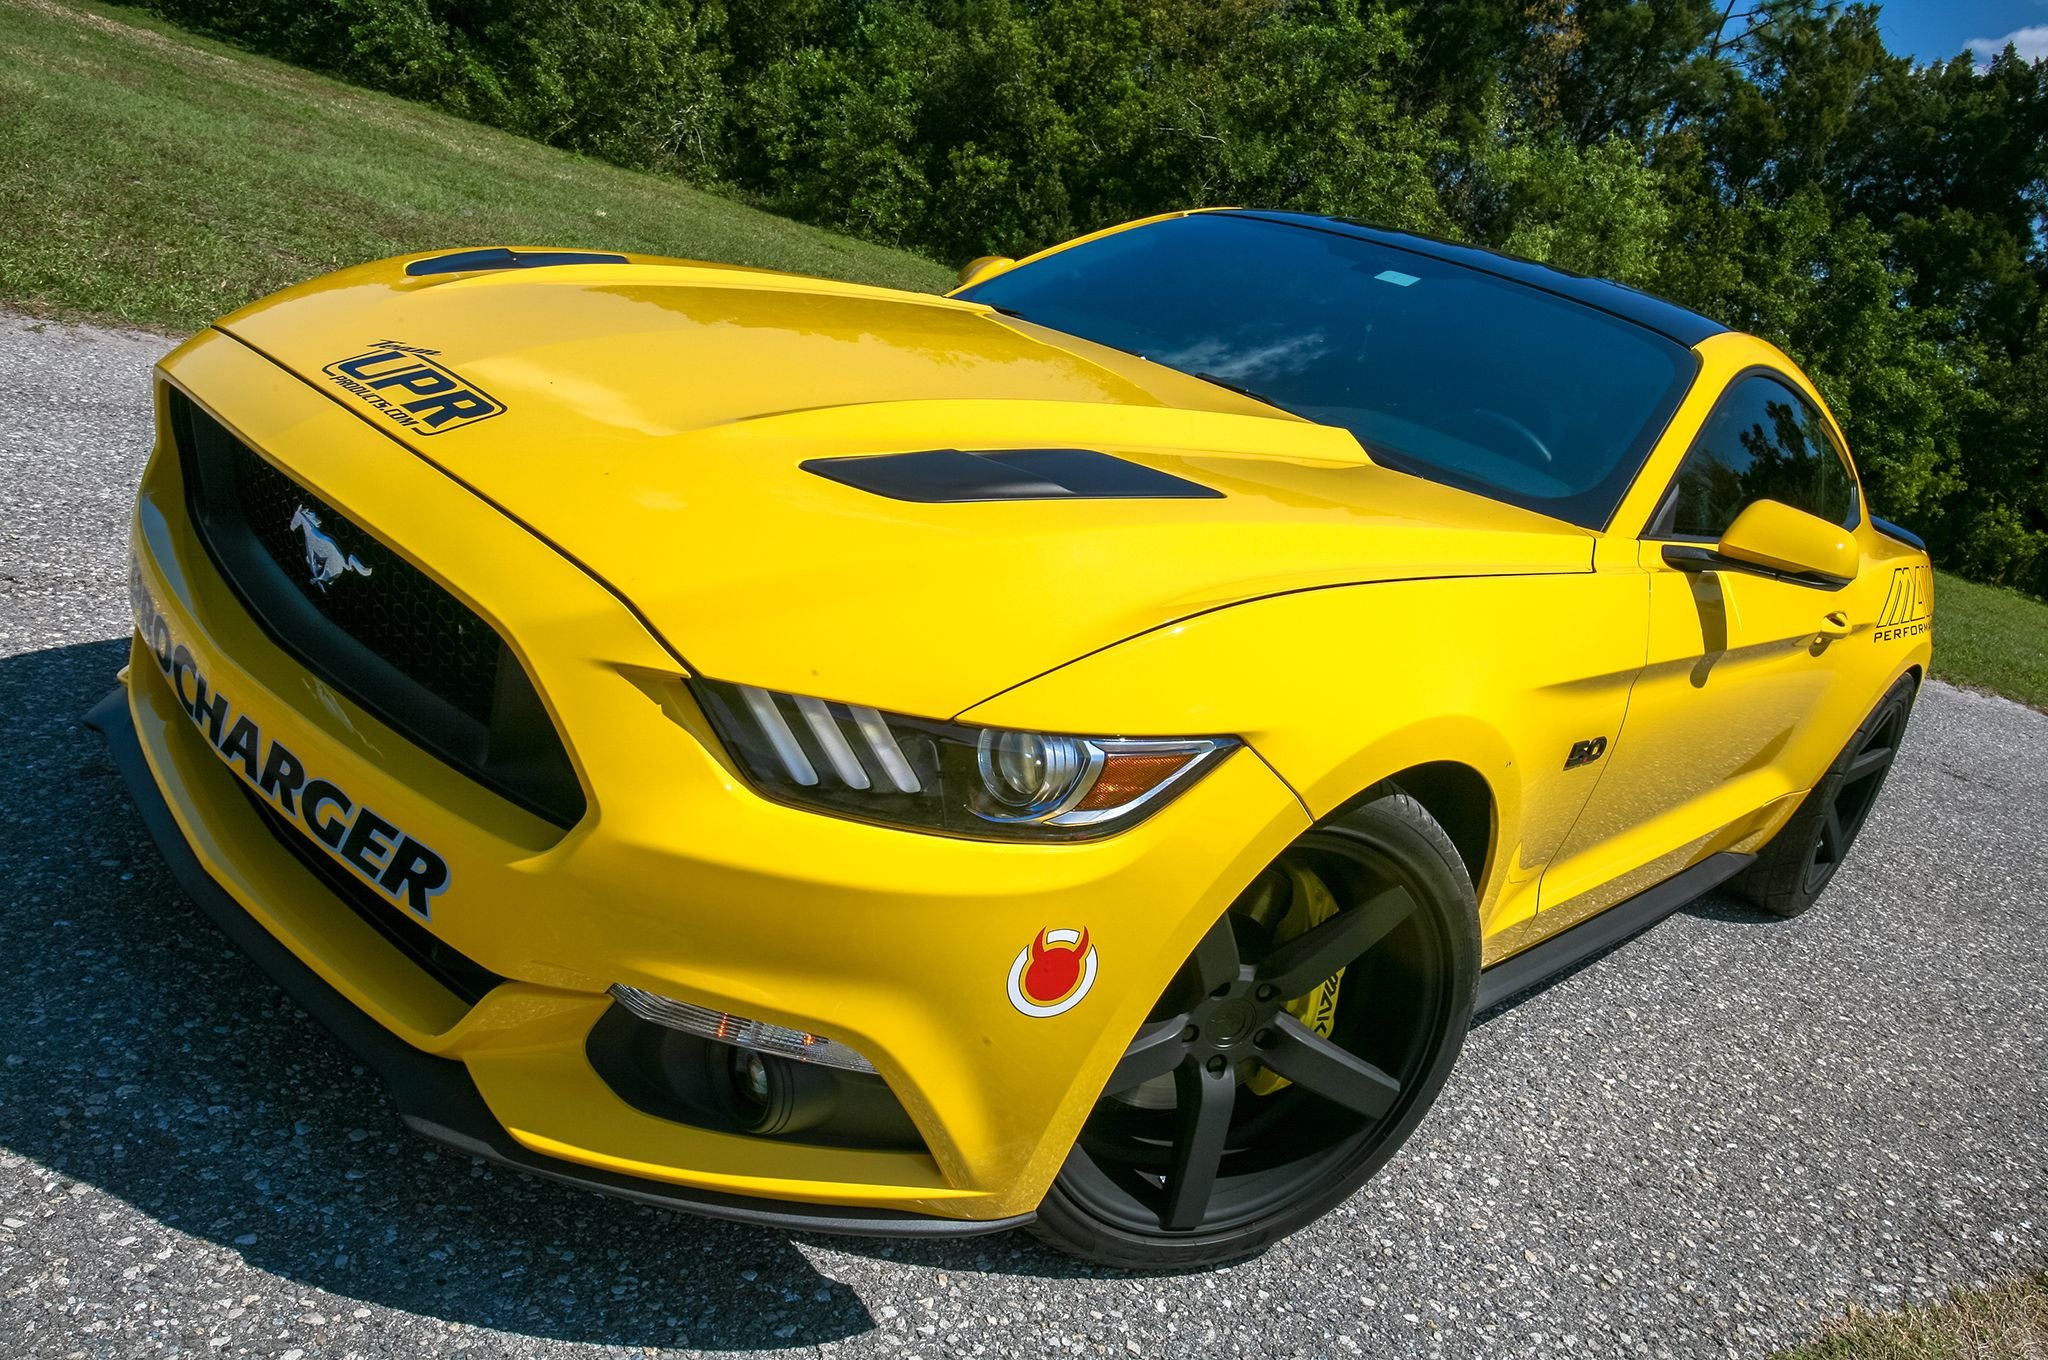 2015, Ford, Mustang, S550, Mak, Pro, Touring, Charger, Super, Car, Usa,  03 Wallpaper